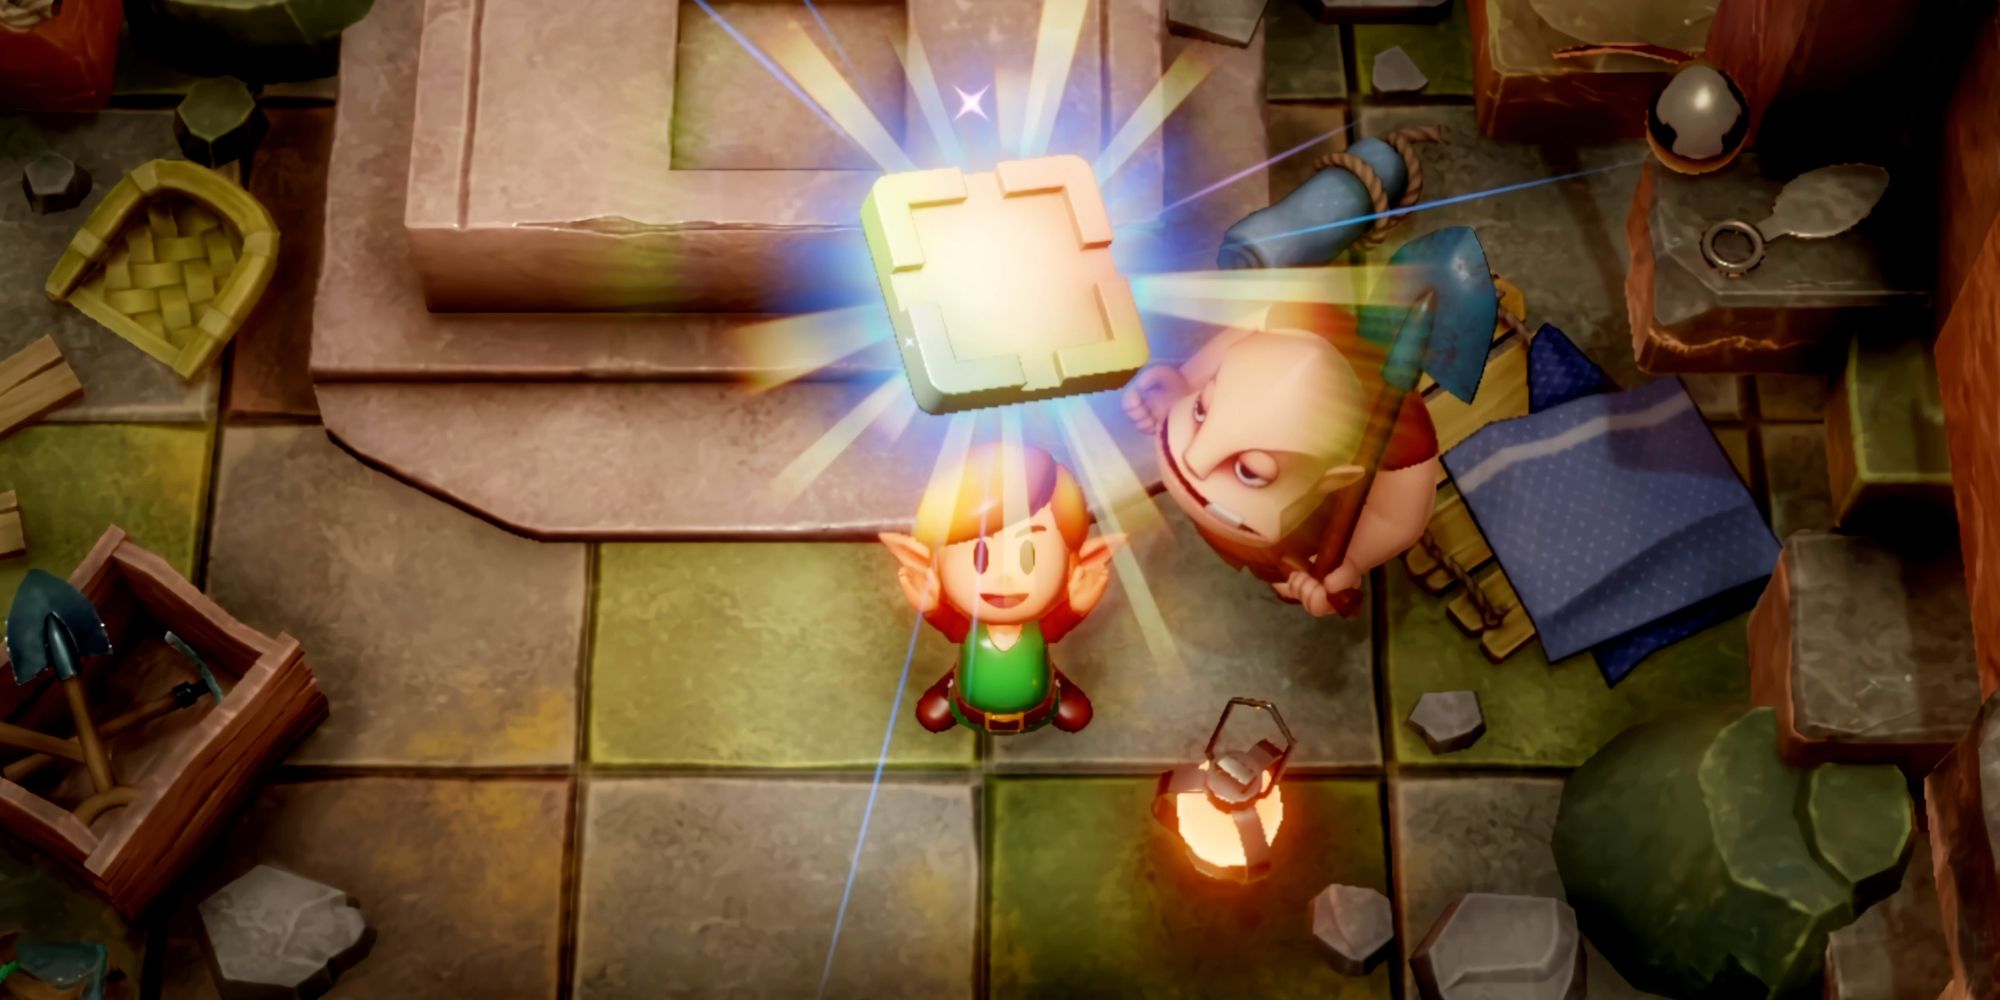 Link holding up a glowing dungeon tile in Dampe's Shack in the Switch Link's Awakening remake.